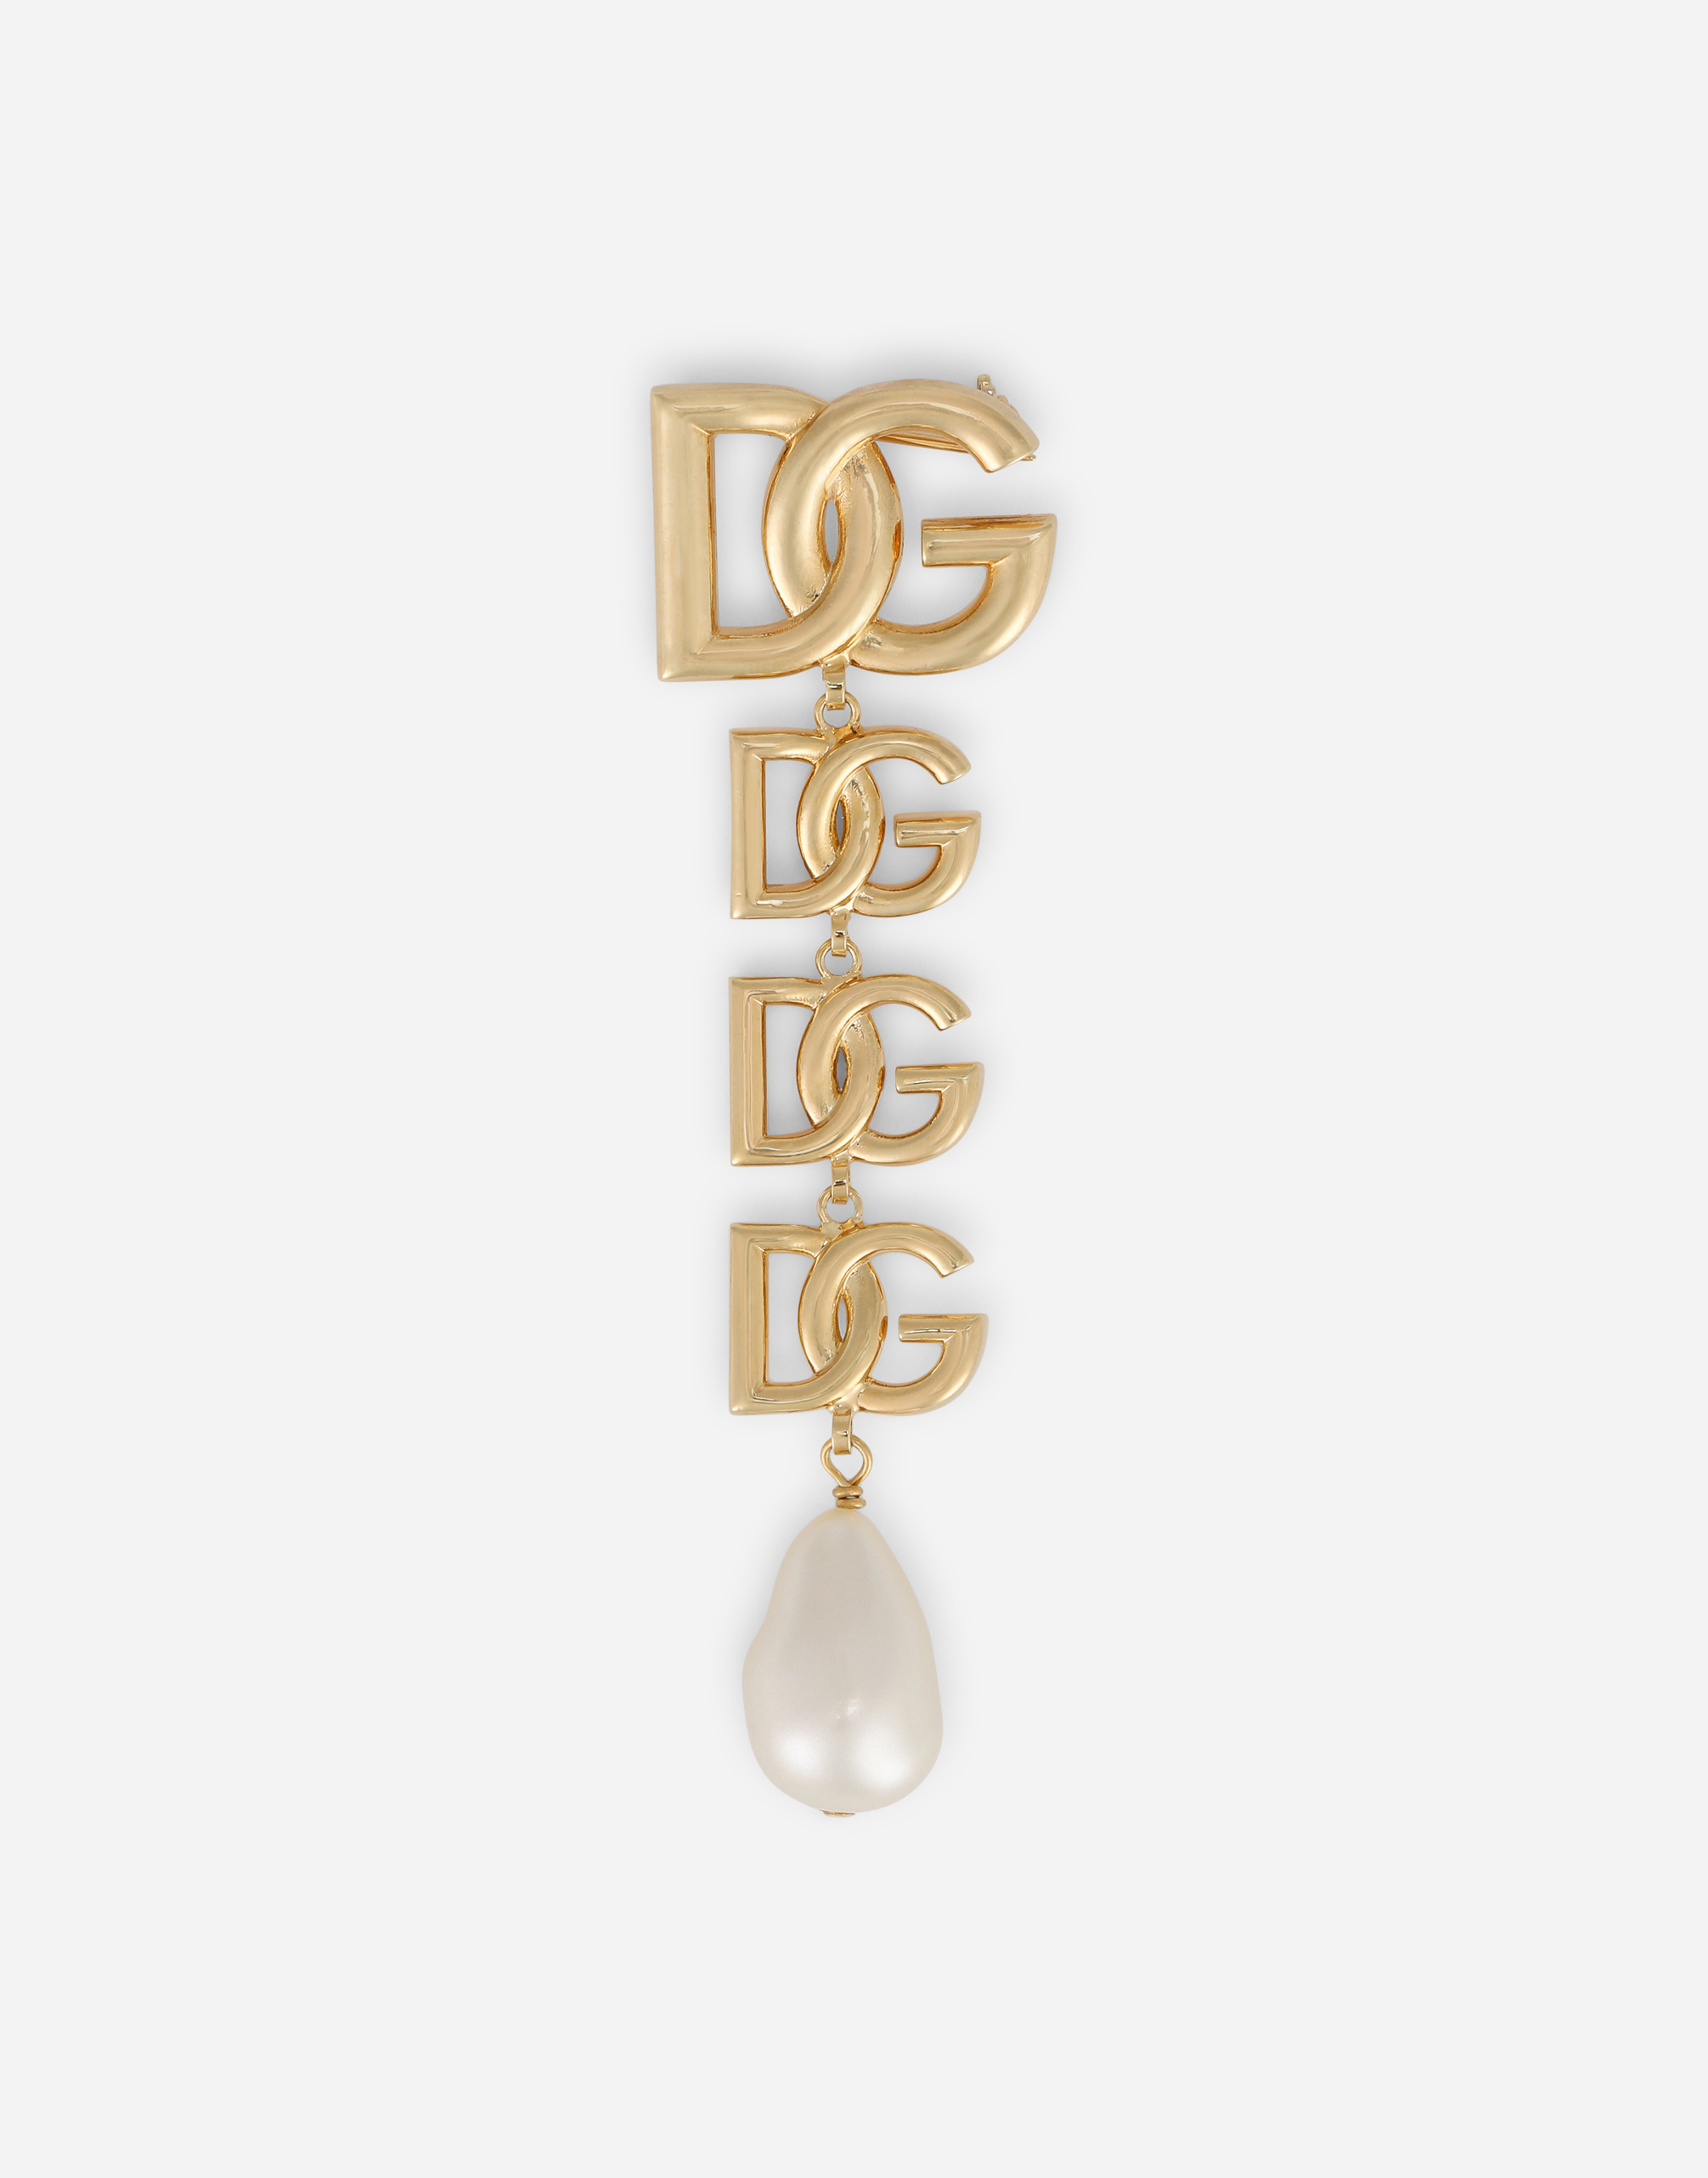 DG multi-logo brooch with pearl embellishment in Gold